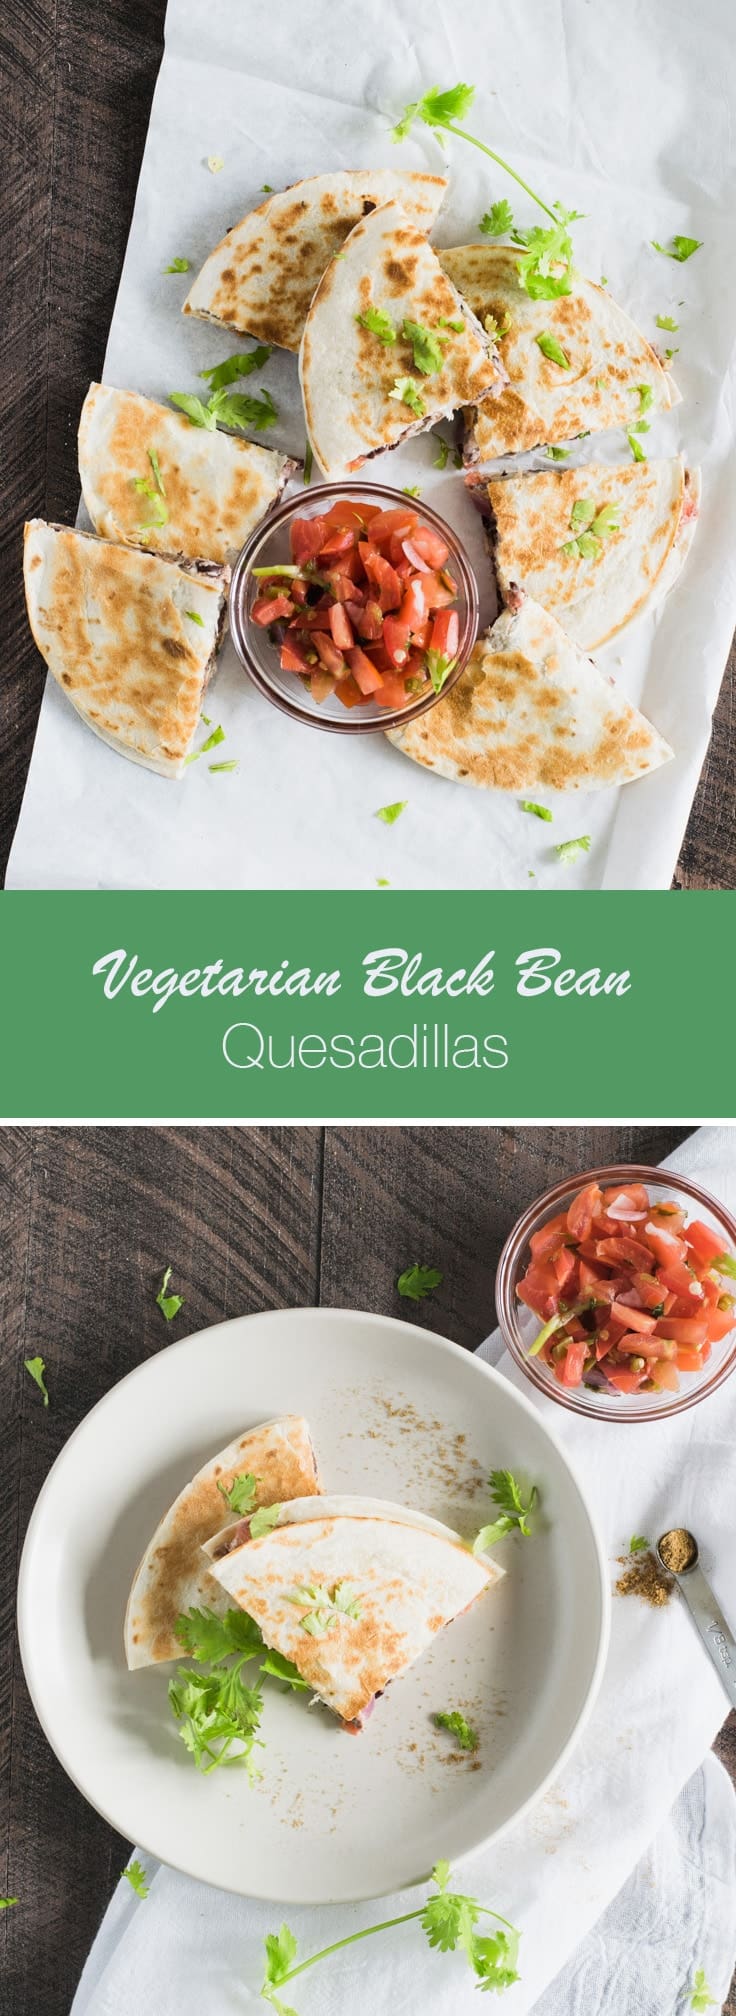 These vegetarian quesadillas are perfect for a weeknight dinner! This easy dinner recipe make a healthy weeknight meal and tastes great too!